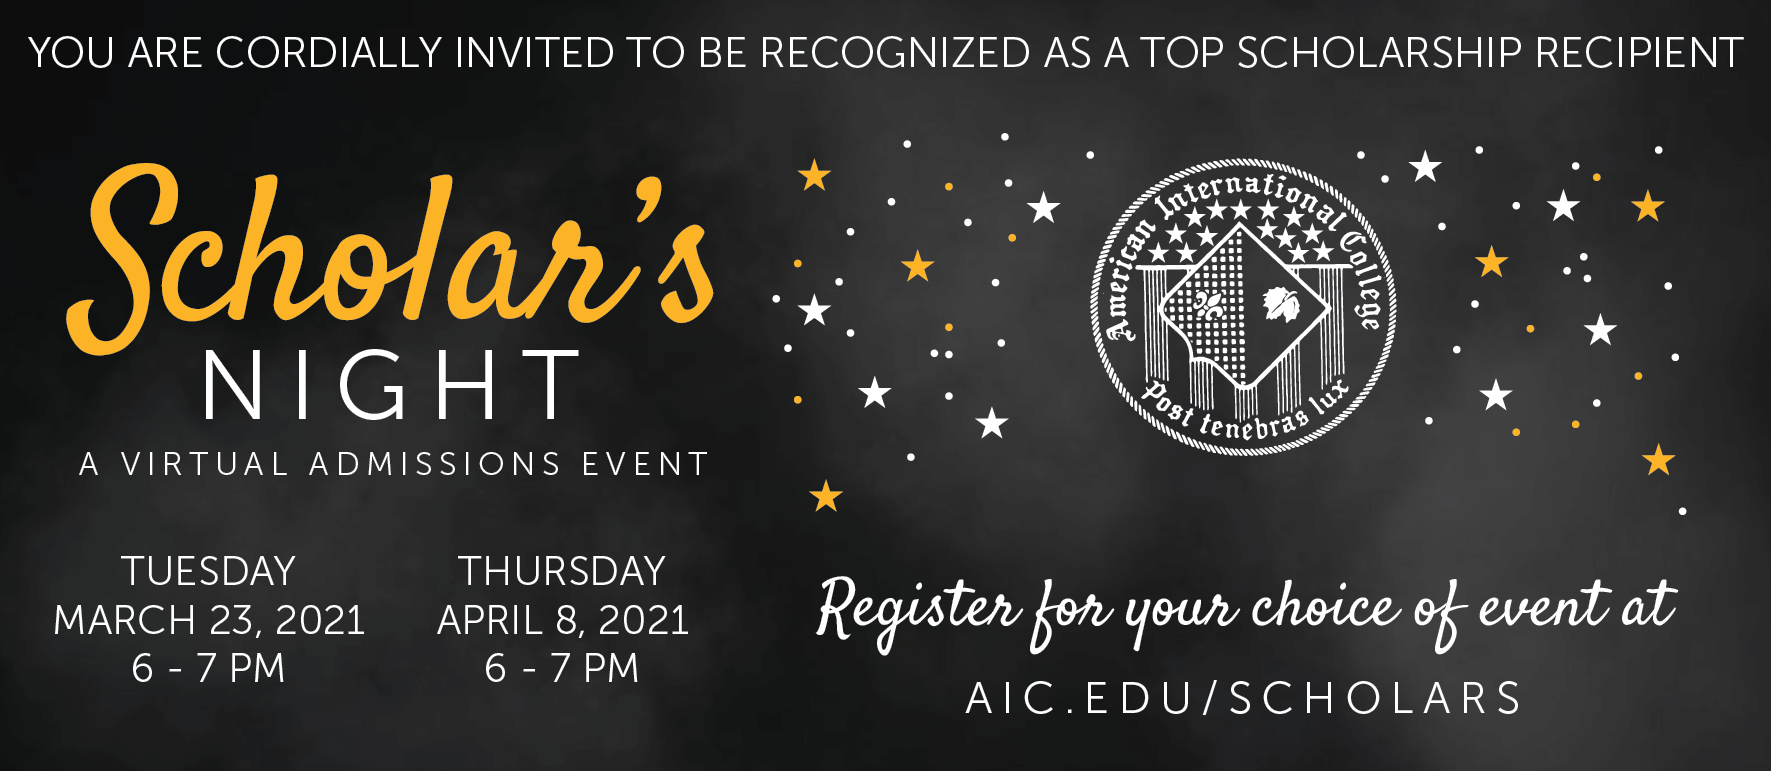 Scholar's night: Top scholarship recipient event March 23 and April 8